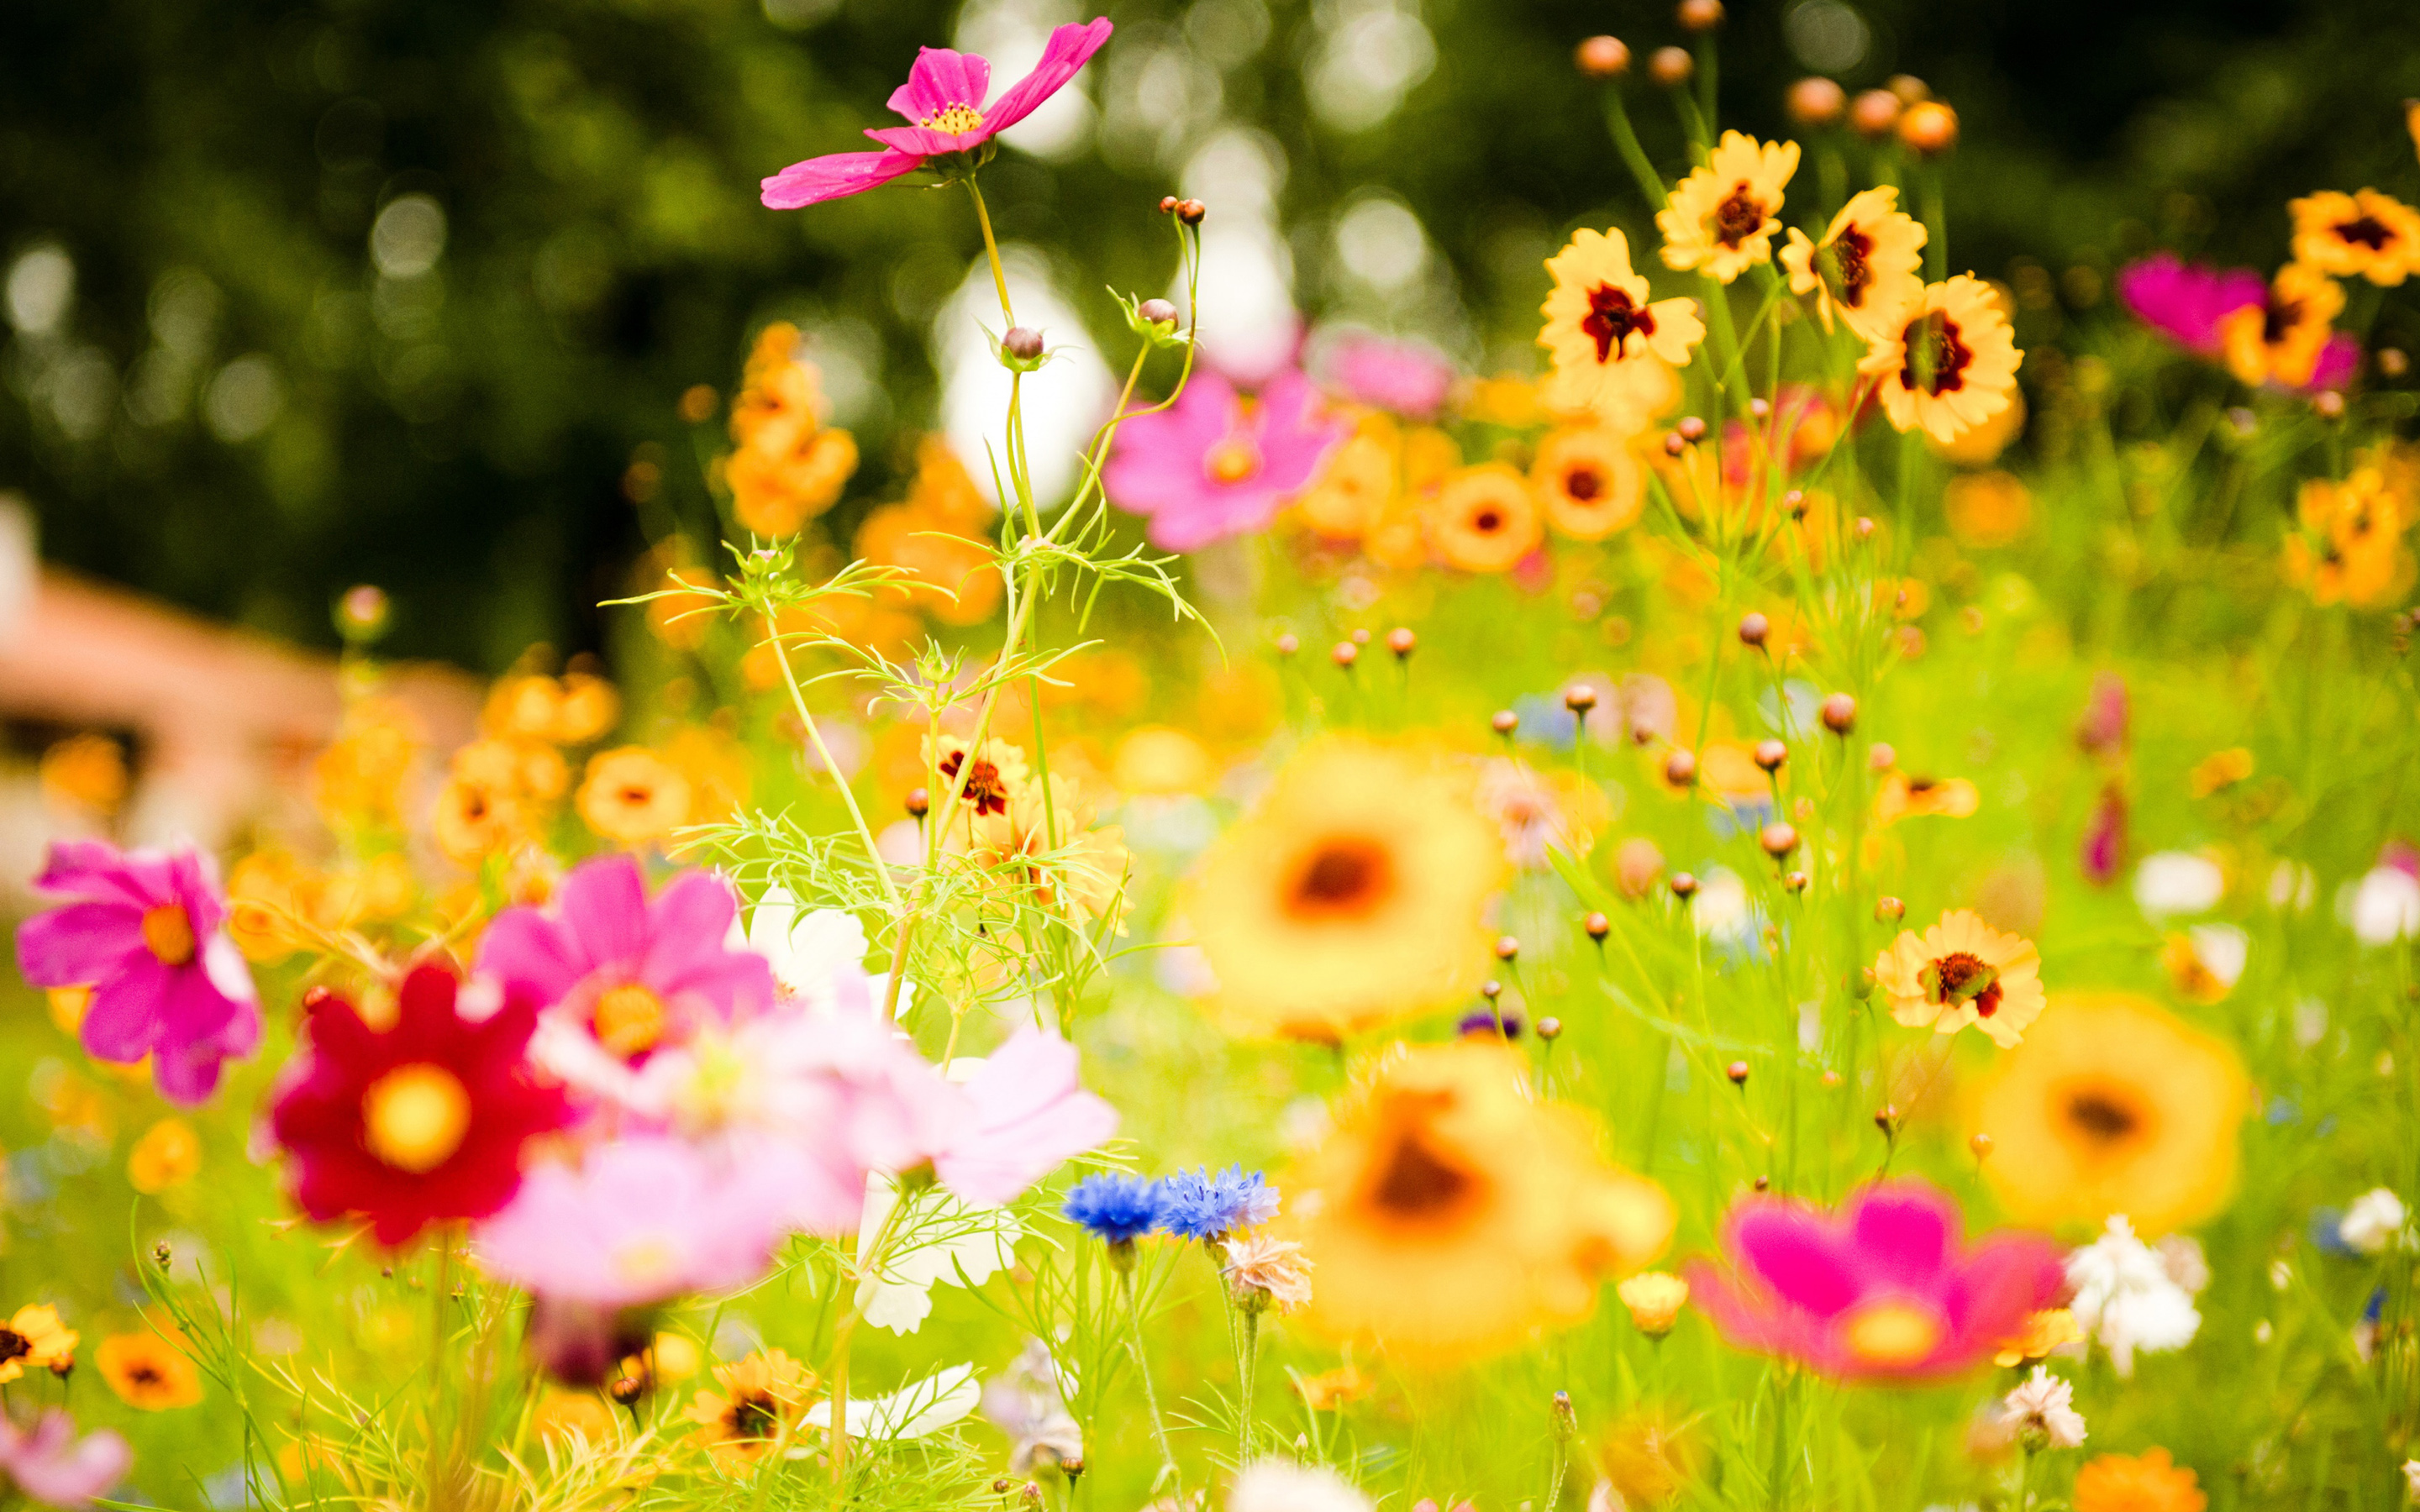 Description Colorful Flowers Wallpaper Background In